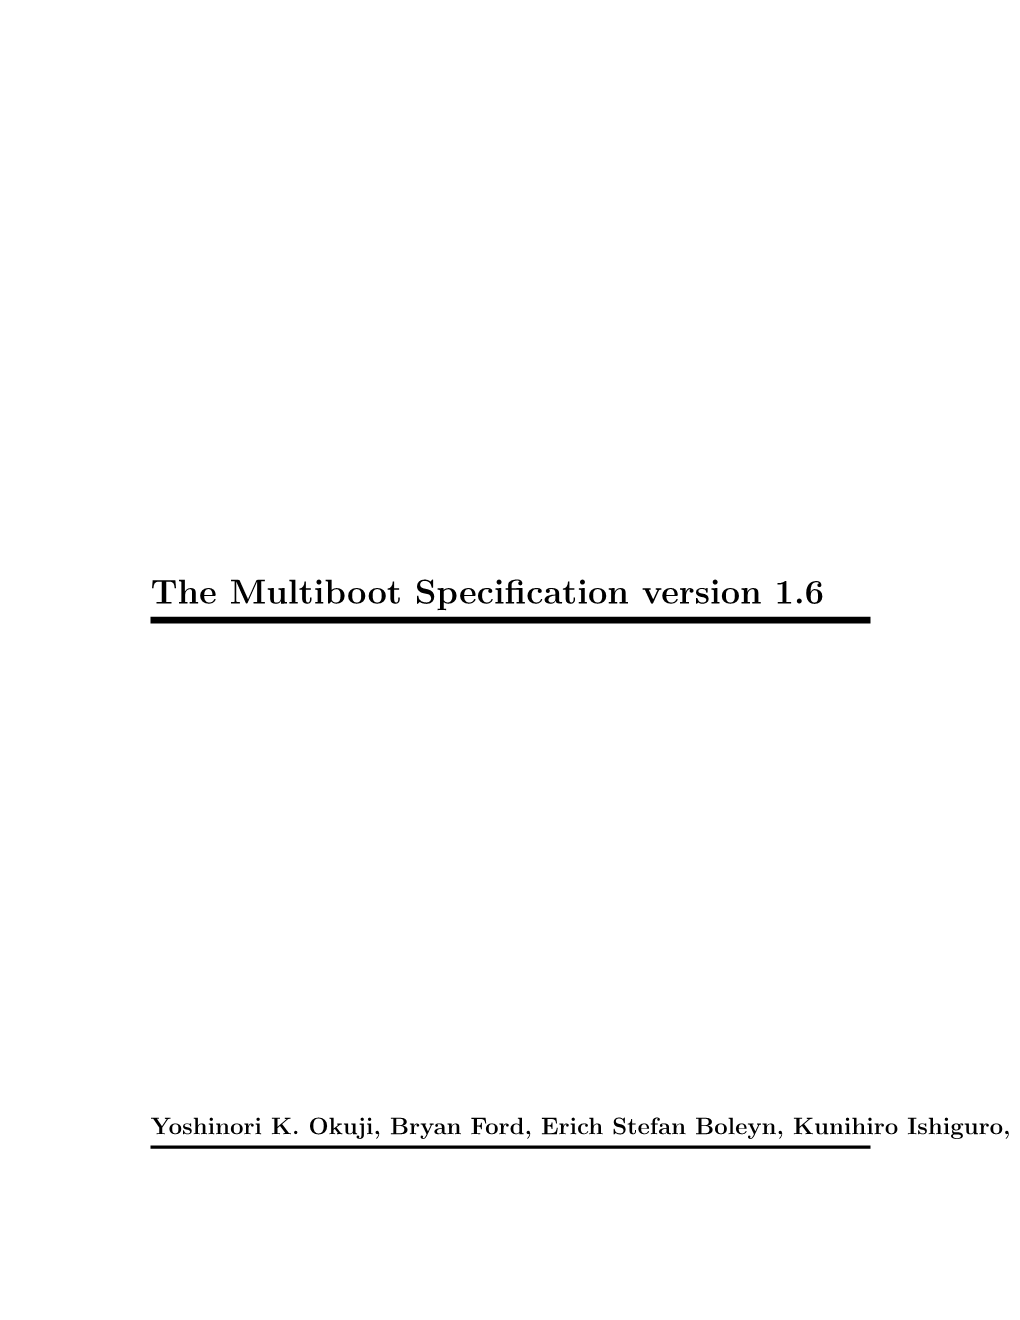 The Multiboot Specification Version 1.6